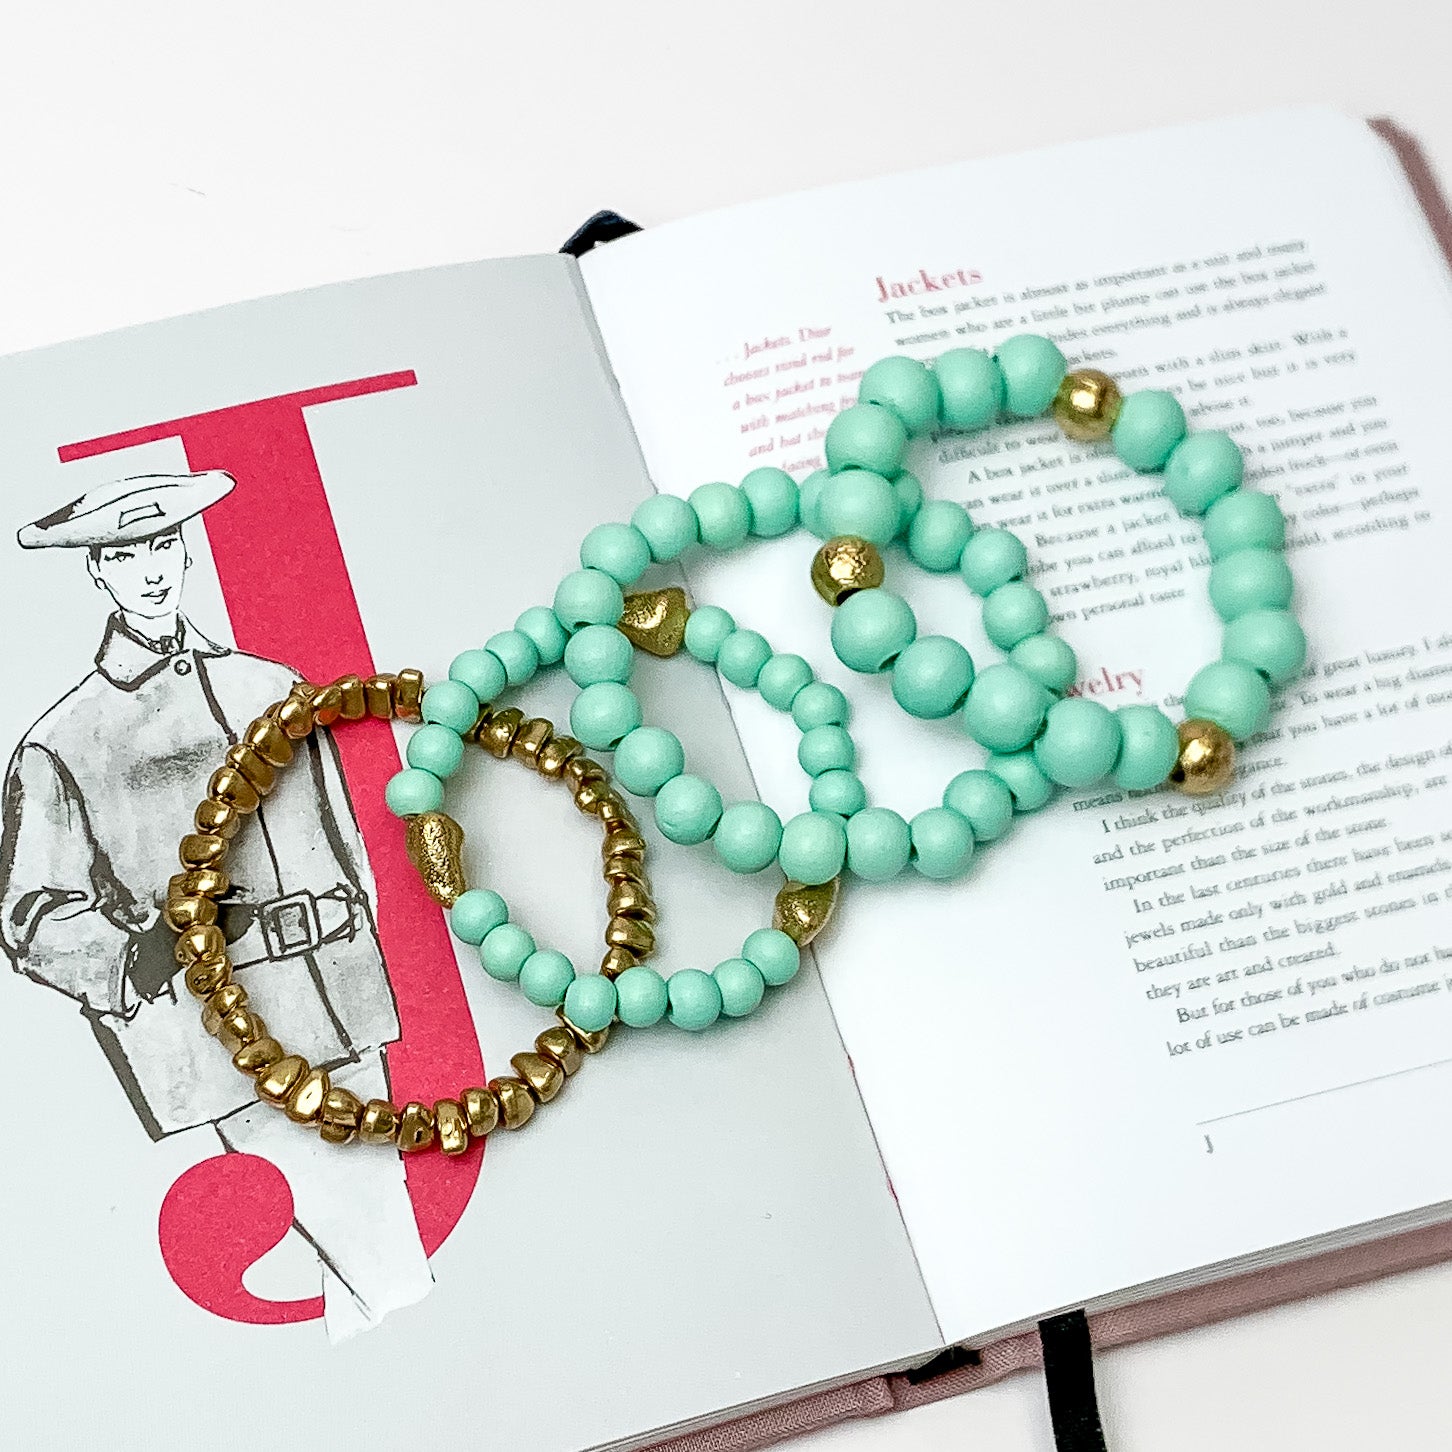 Set of Four | Stretchy Turquoise Blue Beaded Bracelets featuring a Gold Tone Bracelet. Pictured on a white background. Bracelets are laying on top of an open book.